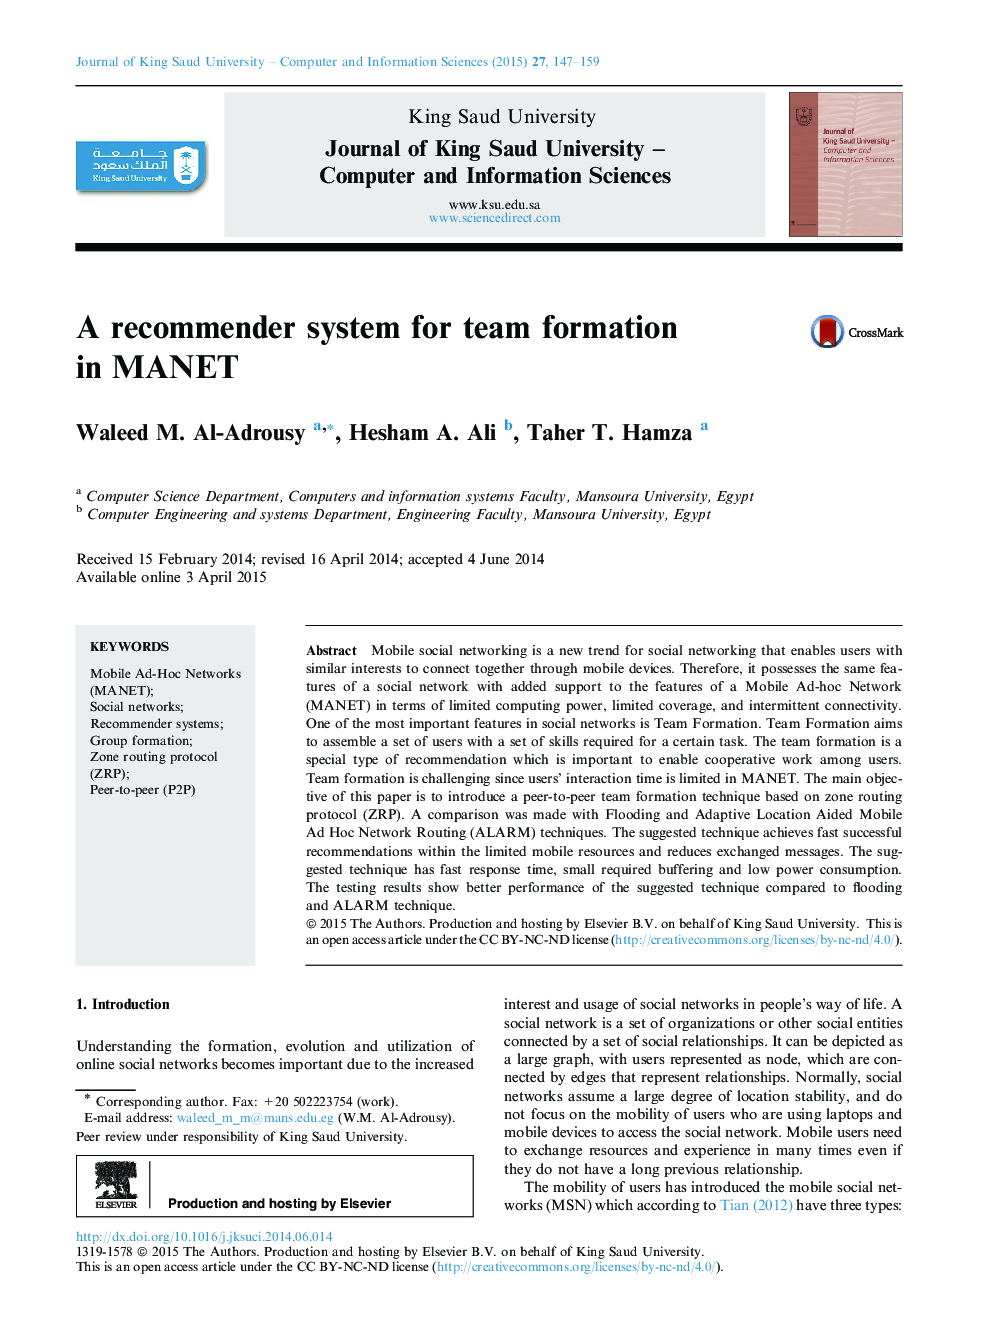 A recommender system for team formation in MANET 